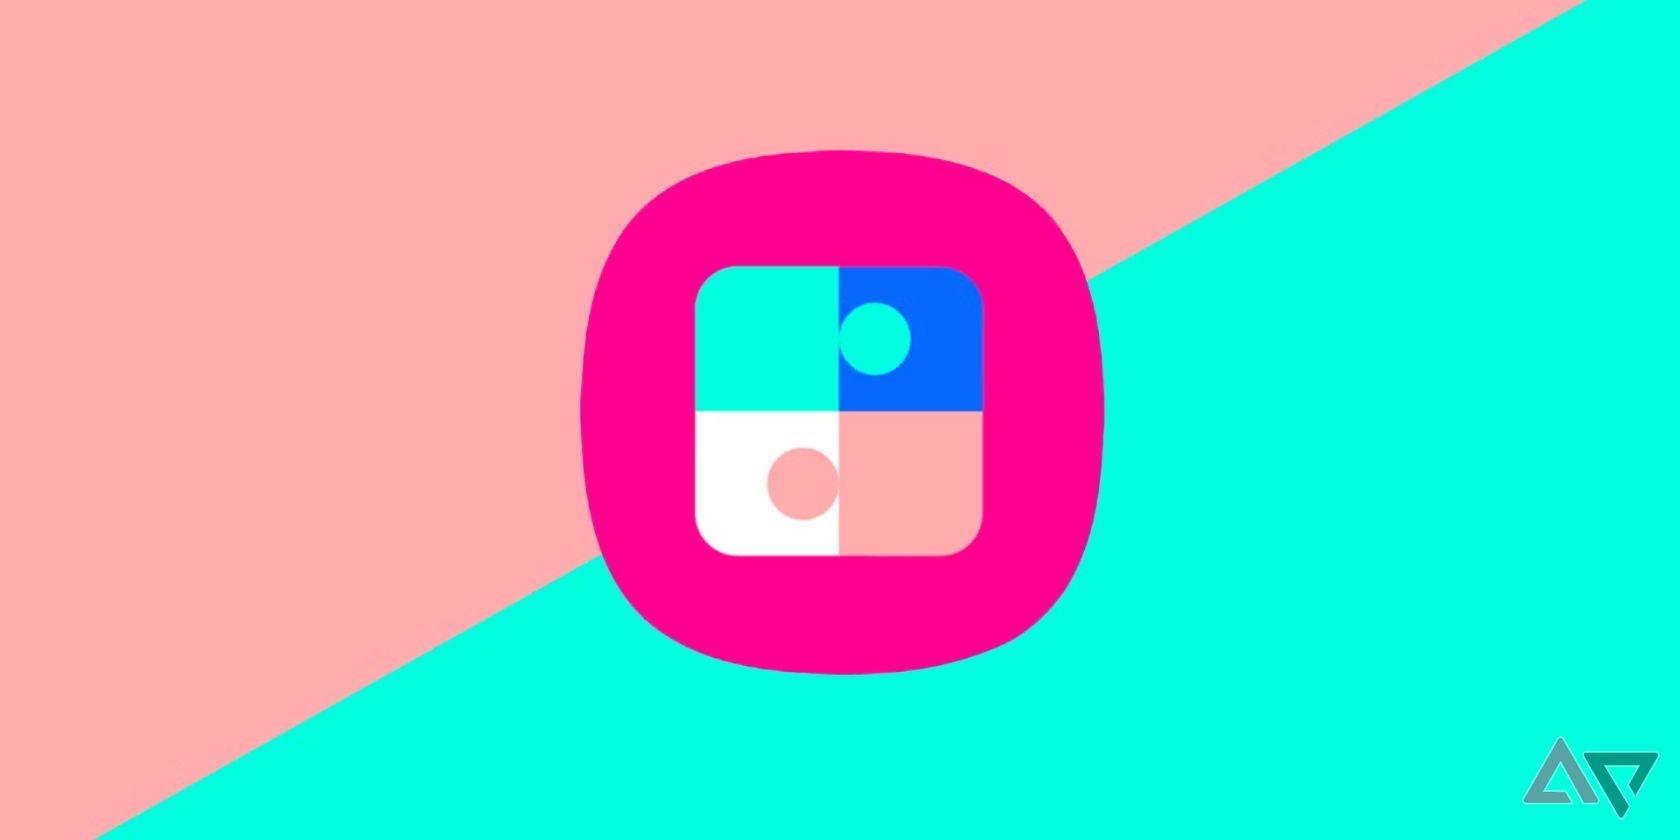 good lock icon on peach and teal background